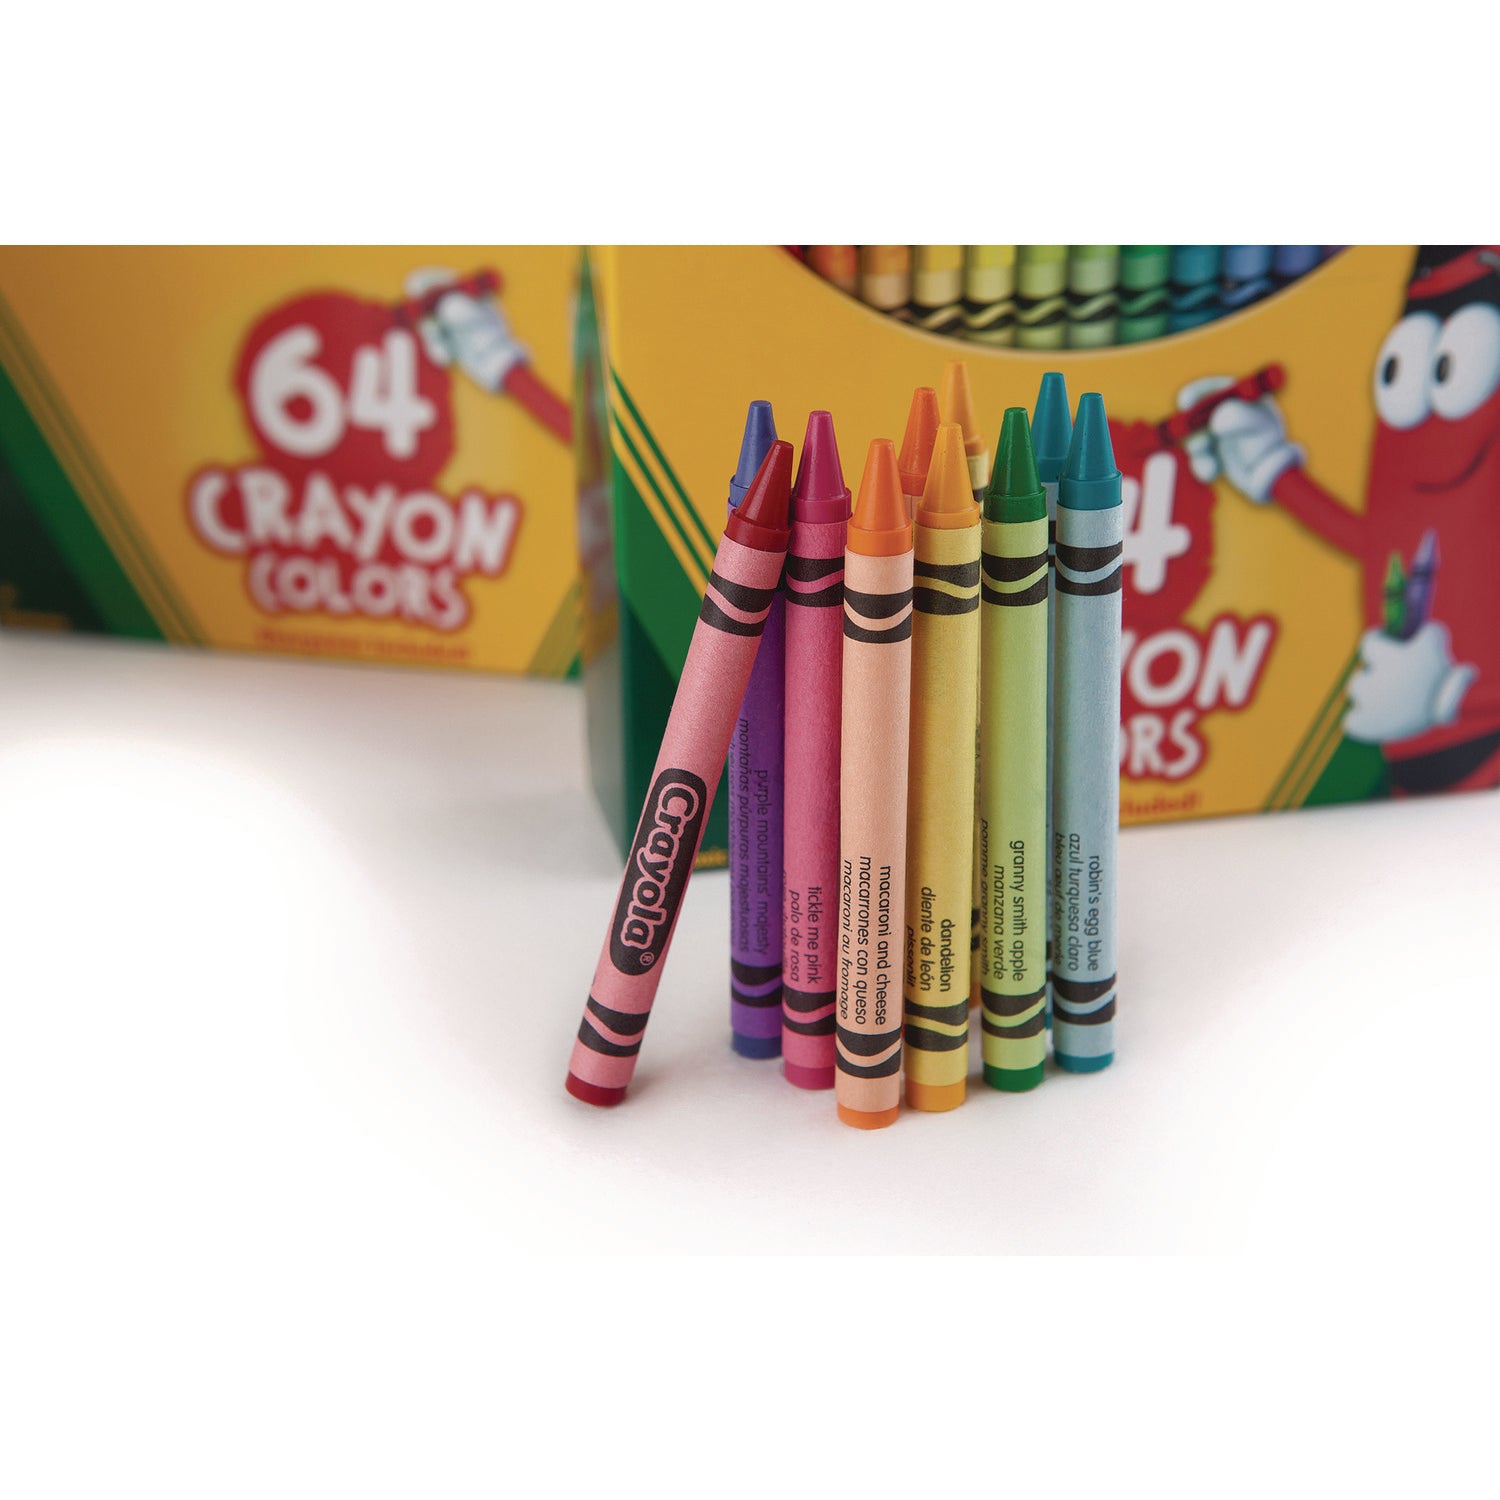 Classic Color Crayons in Flip-Top Pack with Sharpener, 64 Colors/Pack - 